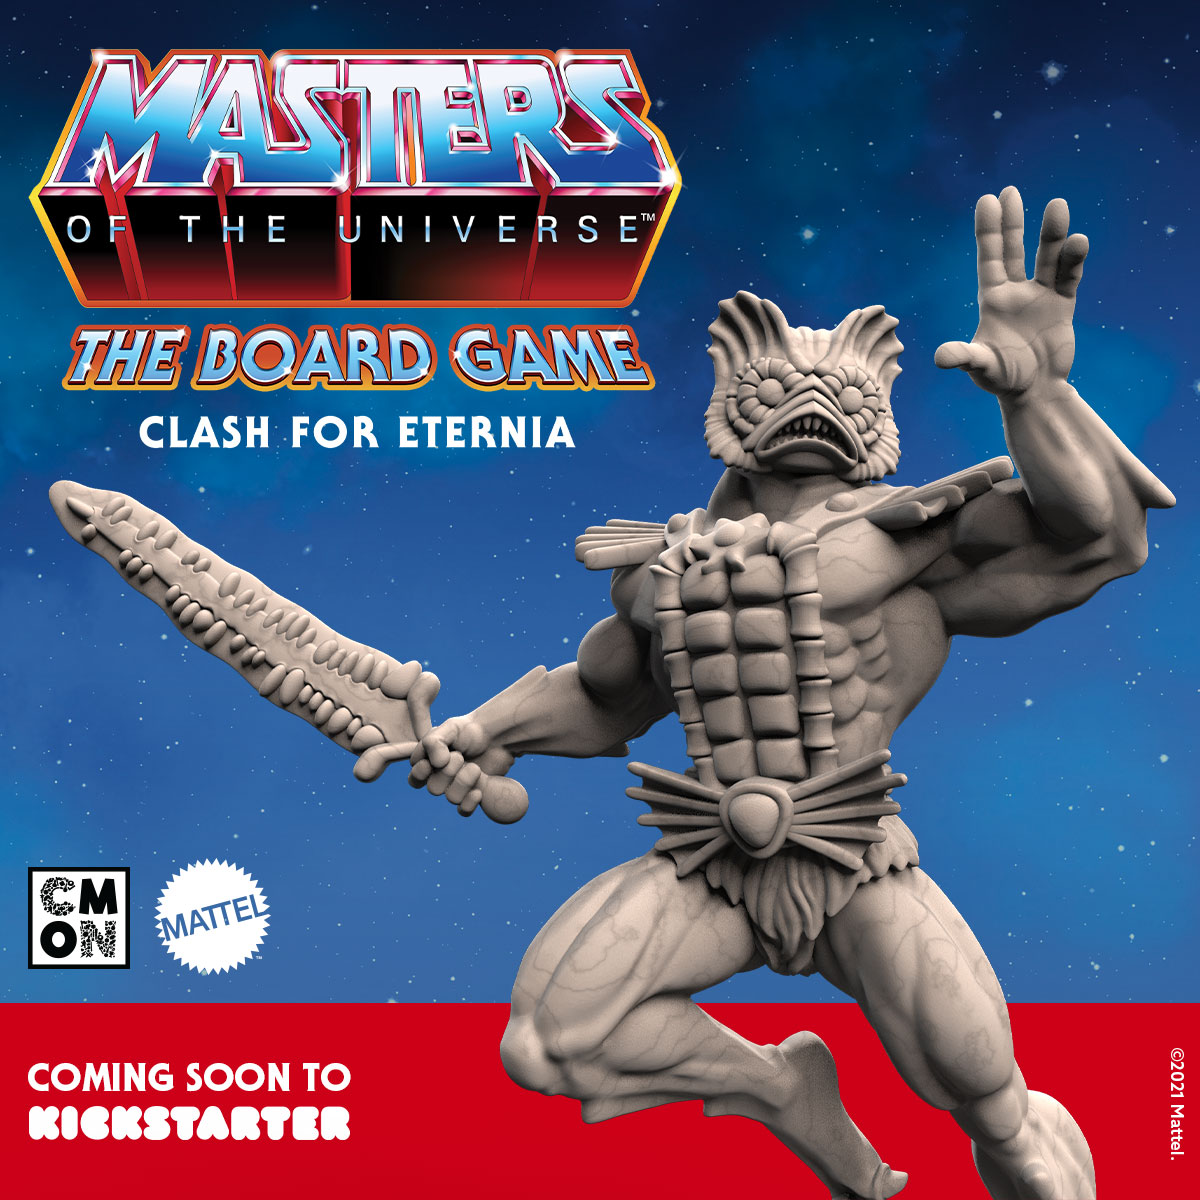 Masters of the Universe: The Board Game - Clash For Eternia by